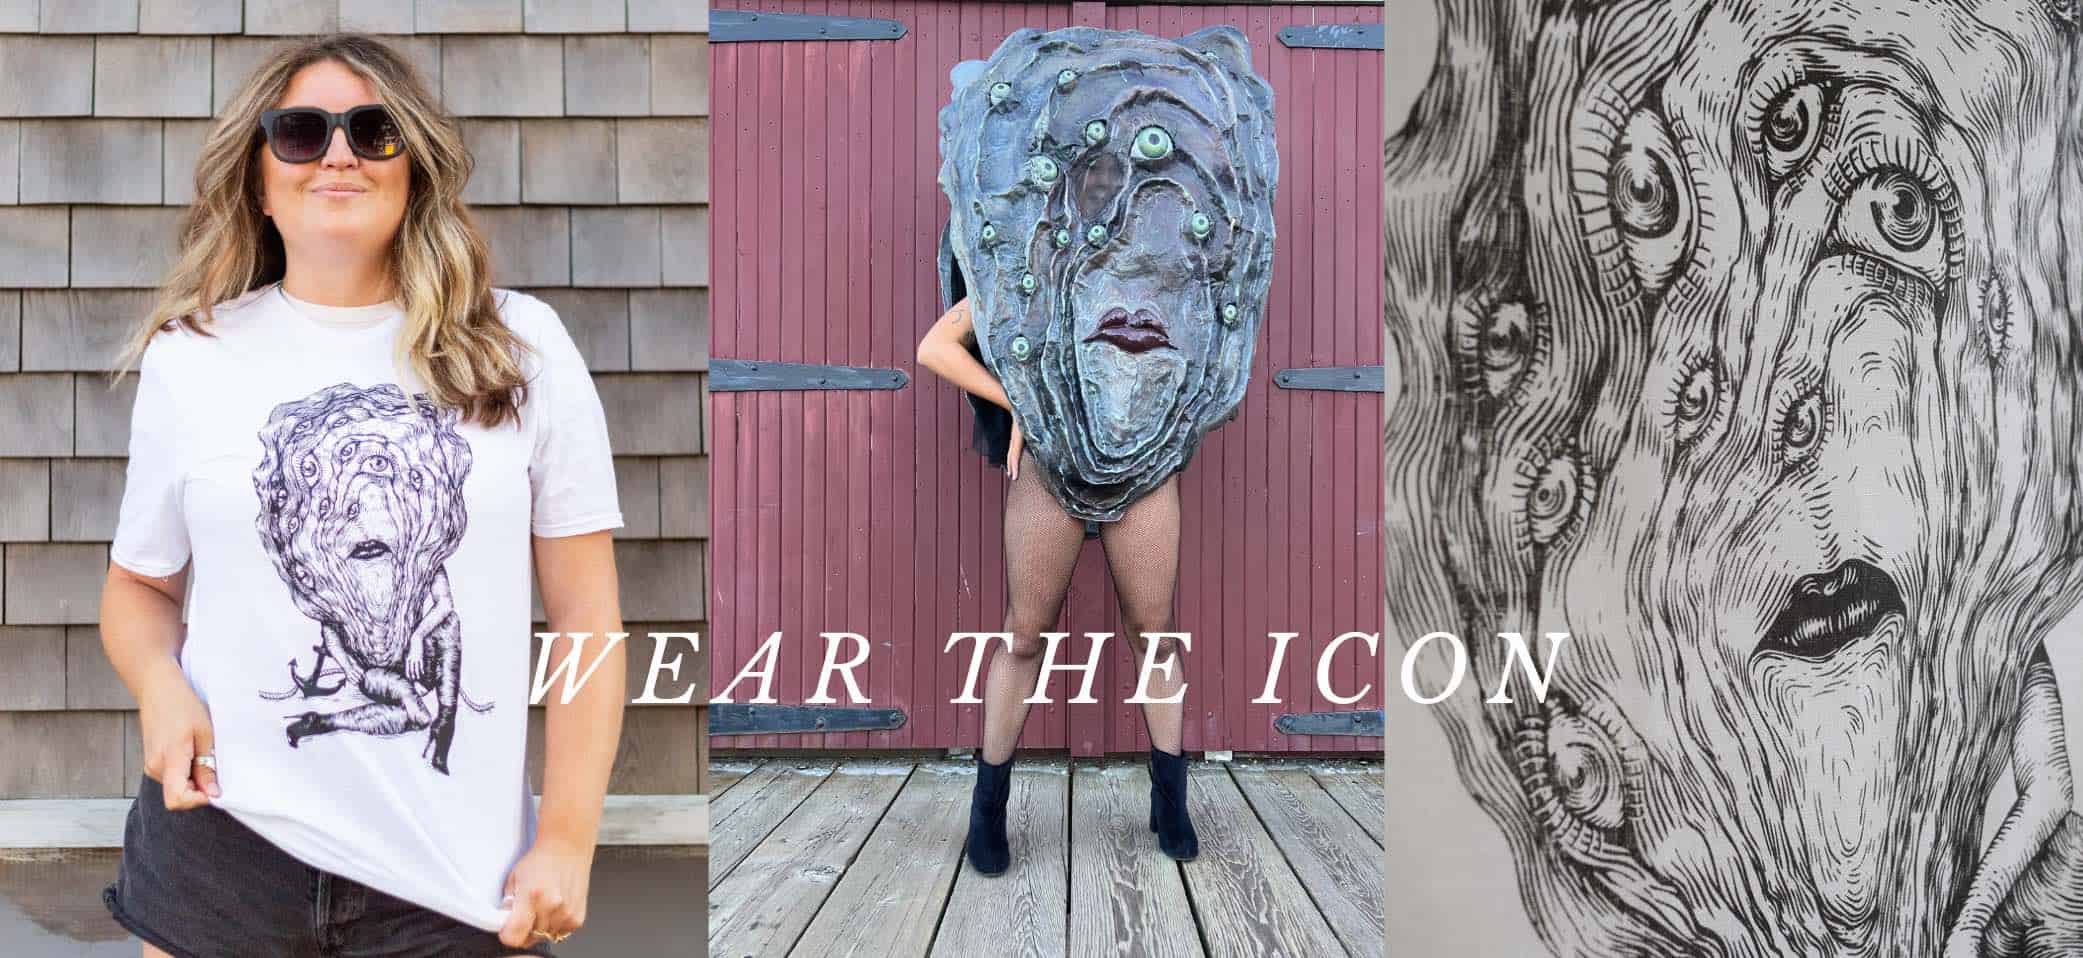 The slogan "wear the icon" appears across an image that is made up of three separate photographs: a woman wearing a white t-shirt printed with a black drawing of the Halifax Oyster Festival mascot Pearl; Pearl herself, or a photo of a woman in fishnet stockings wearing the large papier-mache mask of Pearl; a close-up of a grey t-shirt printed with the black Pearl drawing, a large oyster with at least 13 eyes and prominent lips, and the arms and legs of a human.